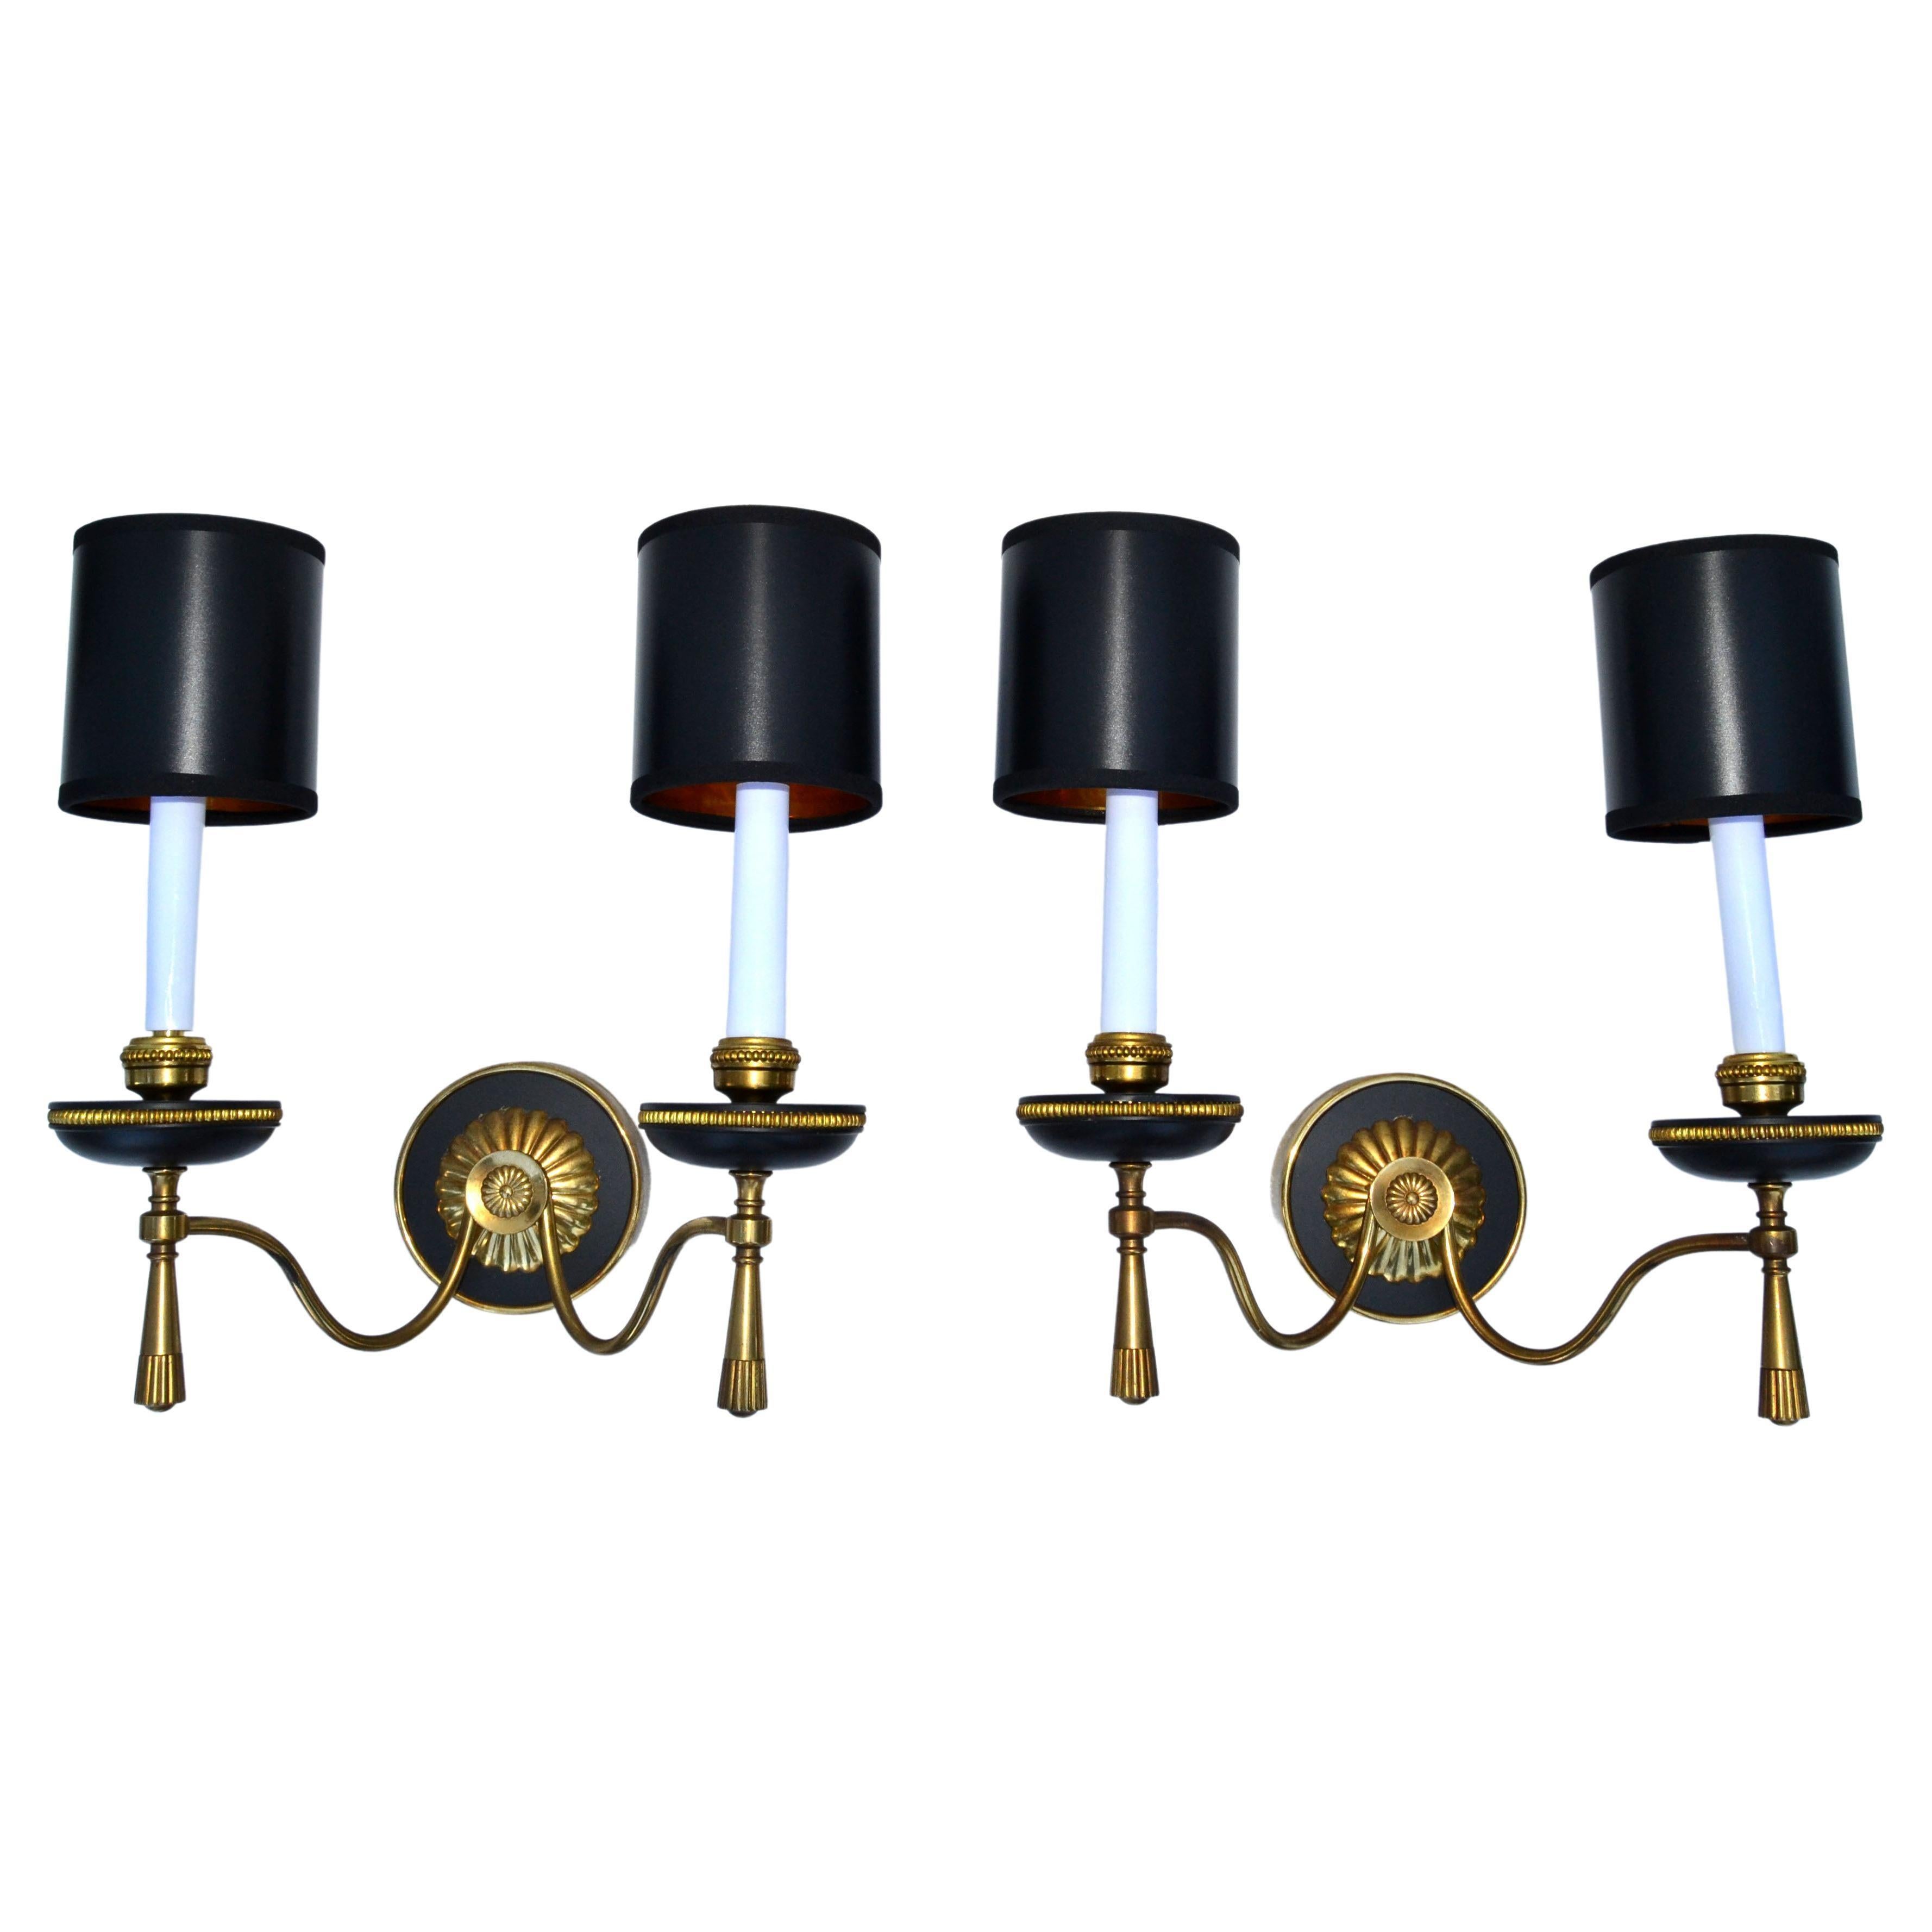 Pair of Mid-Century Modern two light Gaetano Sciolari wall sconces made out of two Patina Bronze and come with Black and Gold Paper Shades.
Each sconce takes 2 light bulbs with max. 40 watts.
Round back plate measures: 4.5 inches.
Projection of